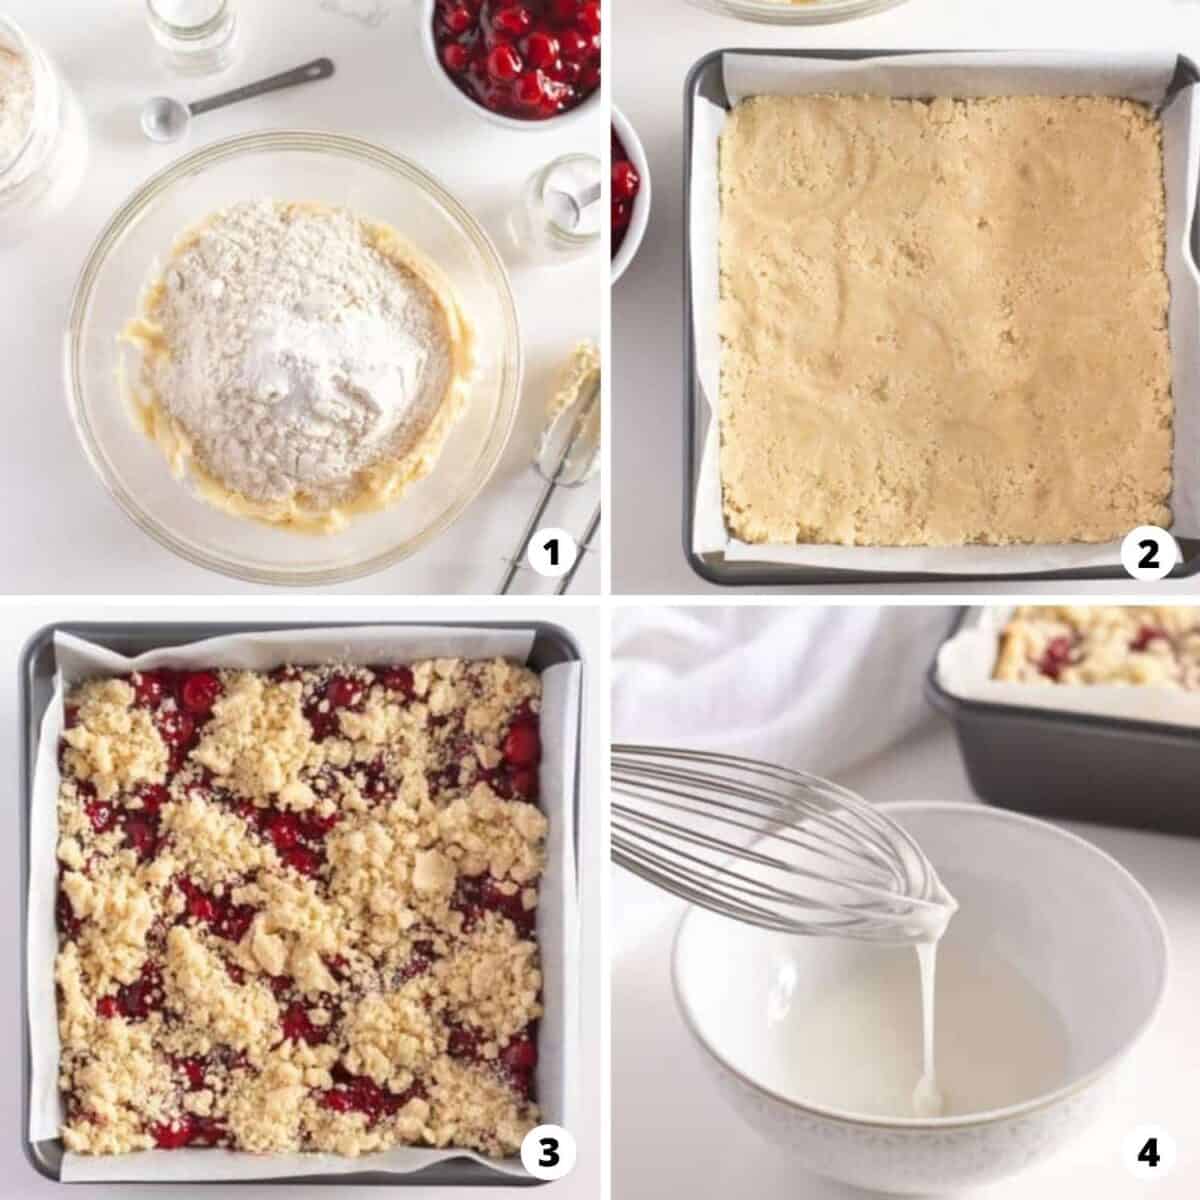 The process of making cherry pie bars in a four step photo collage.